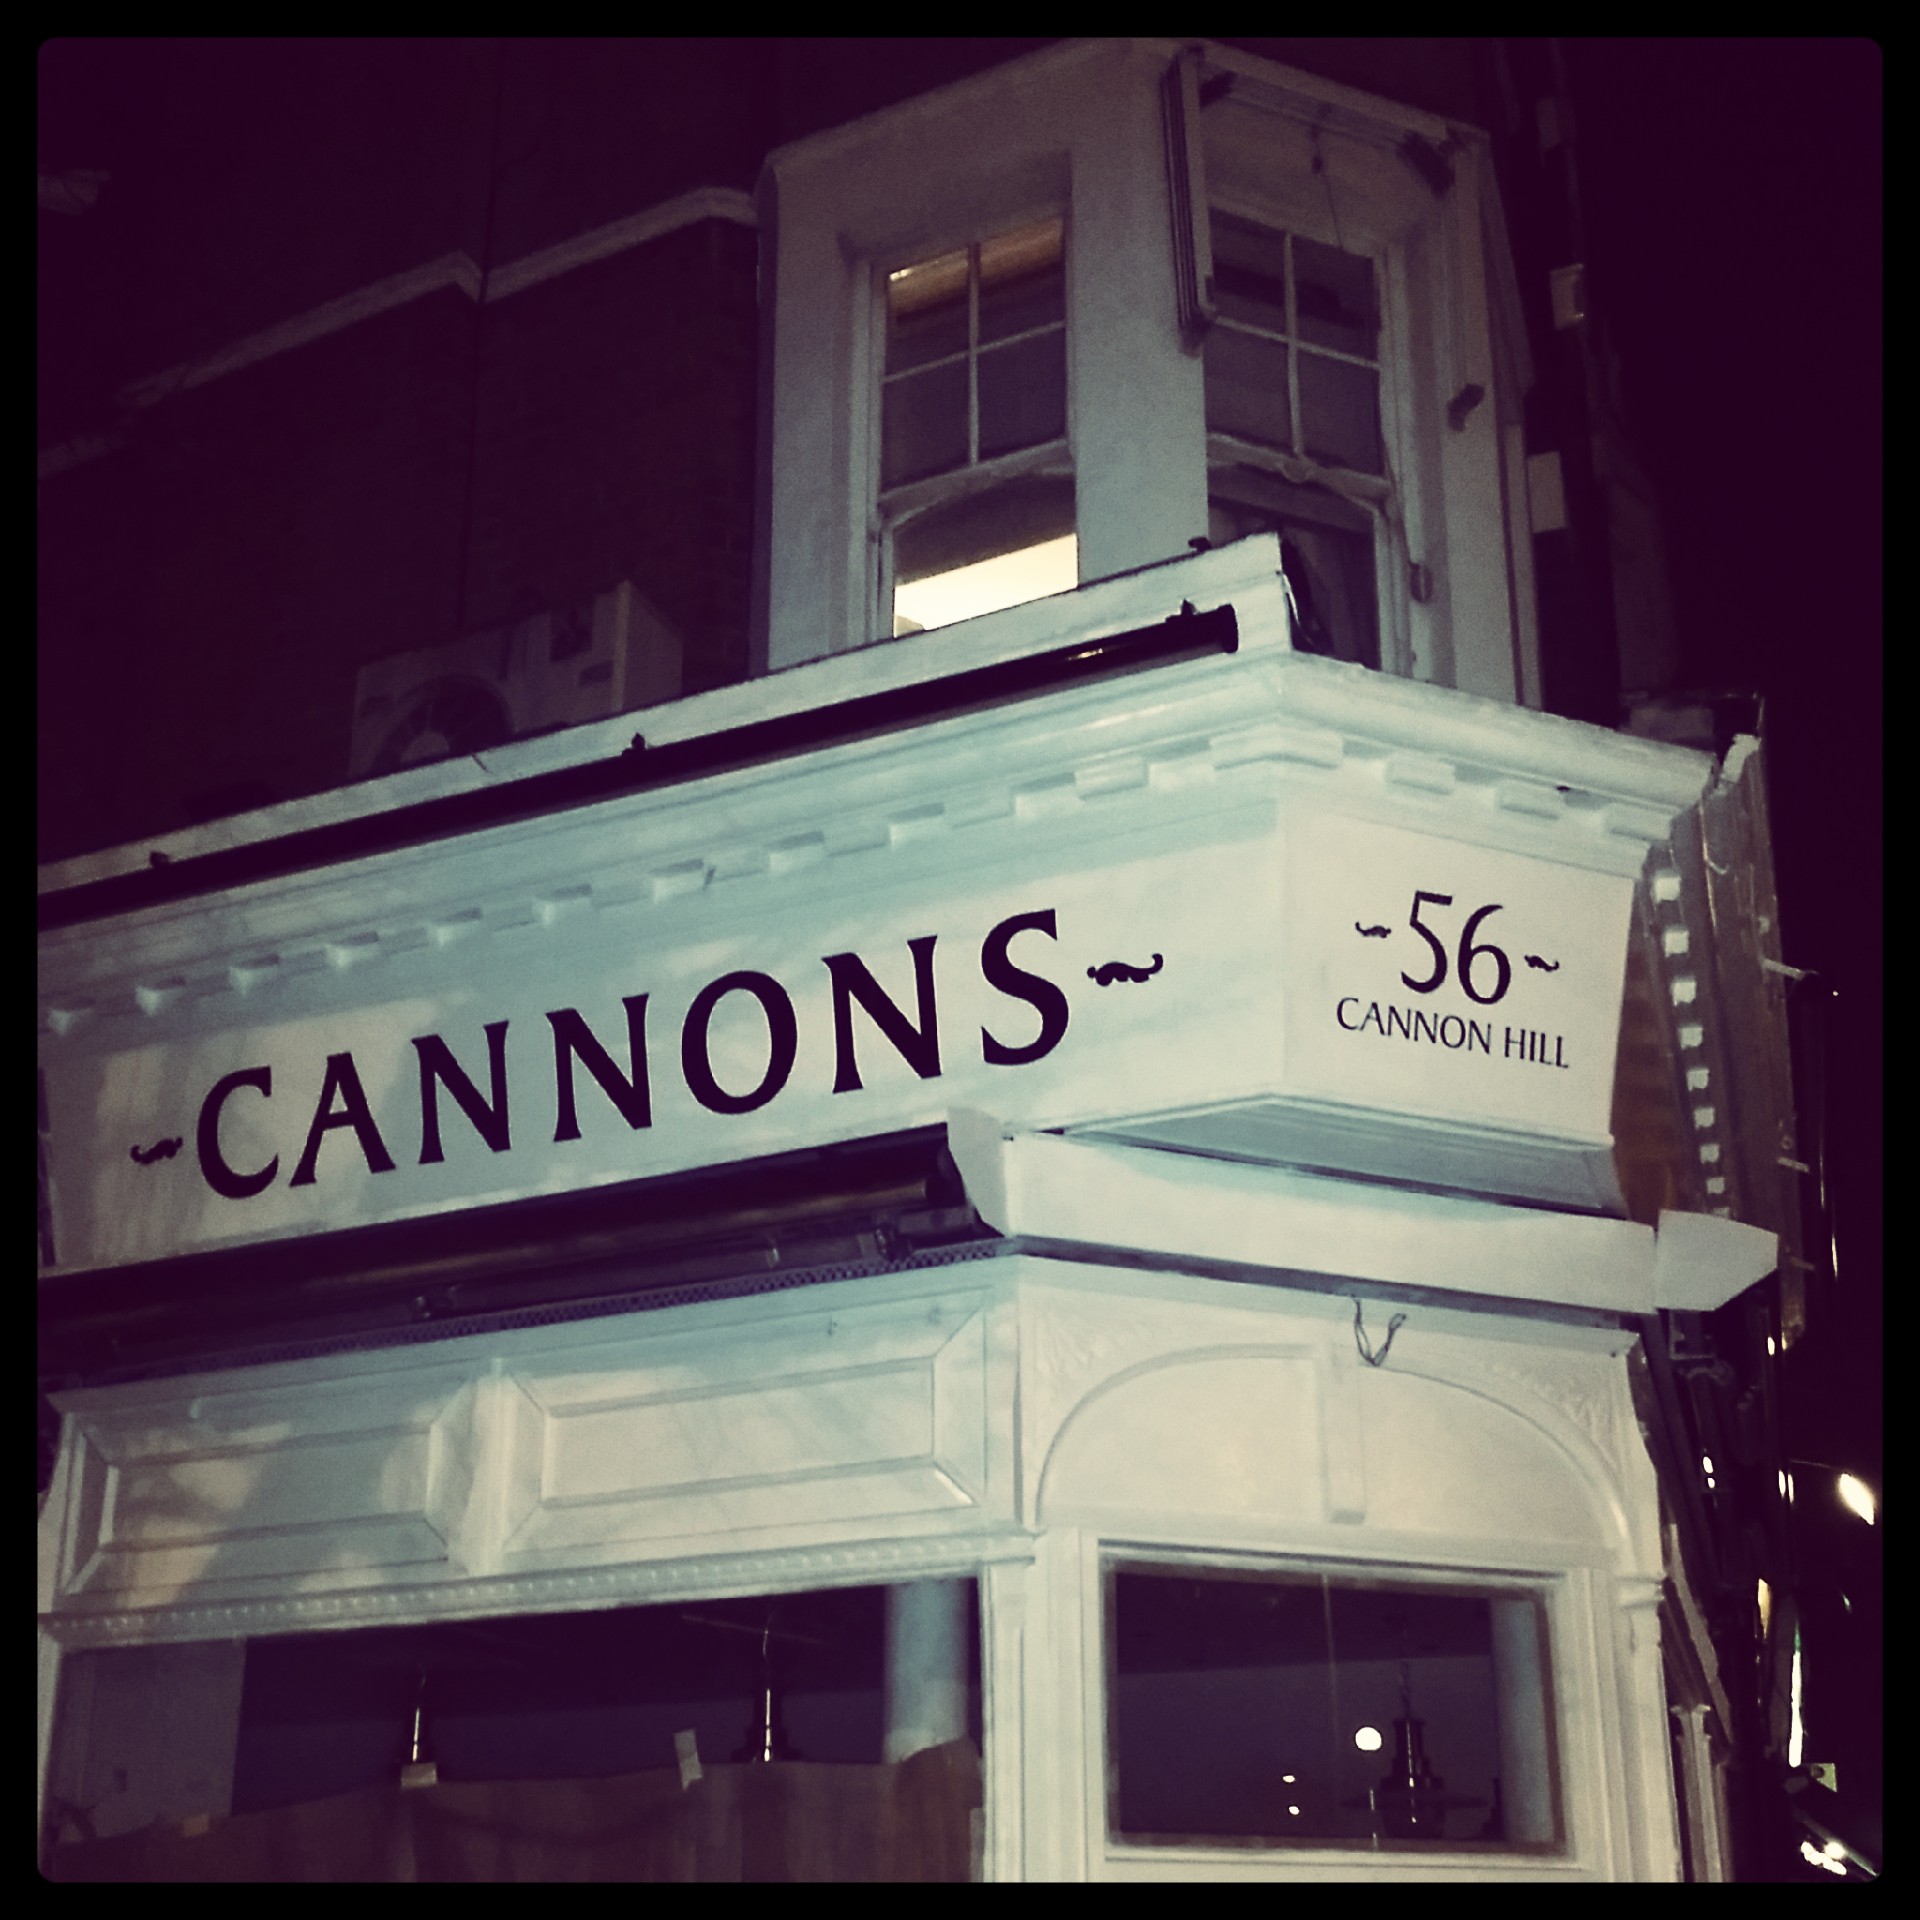 Cannons Fish & Chips